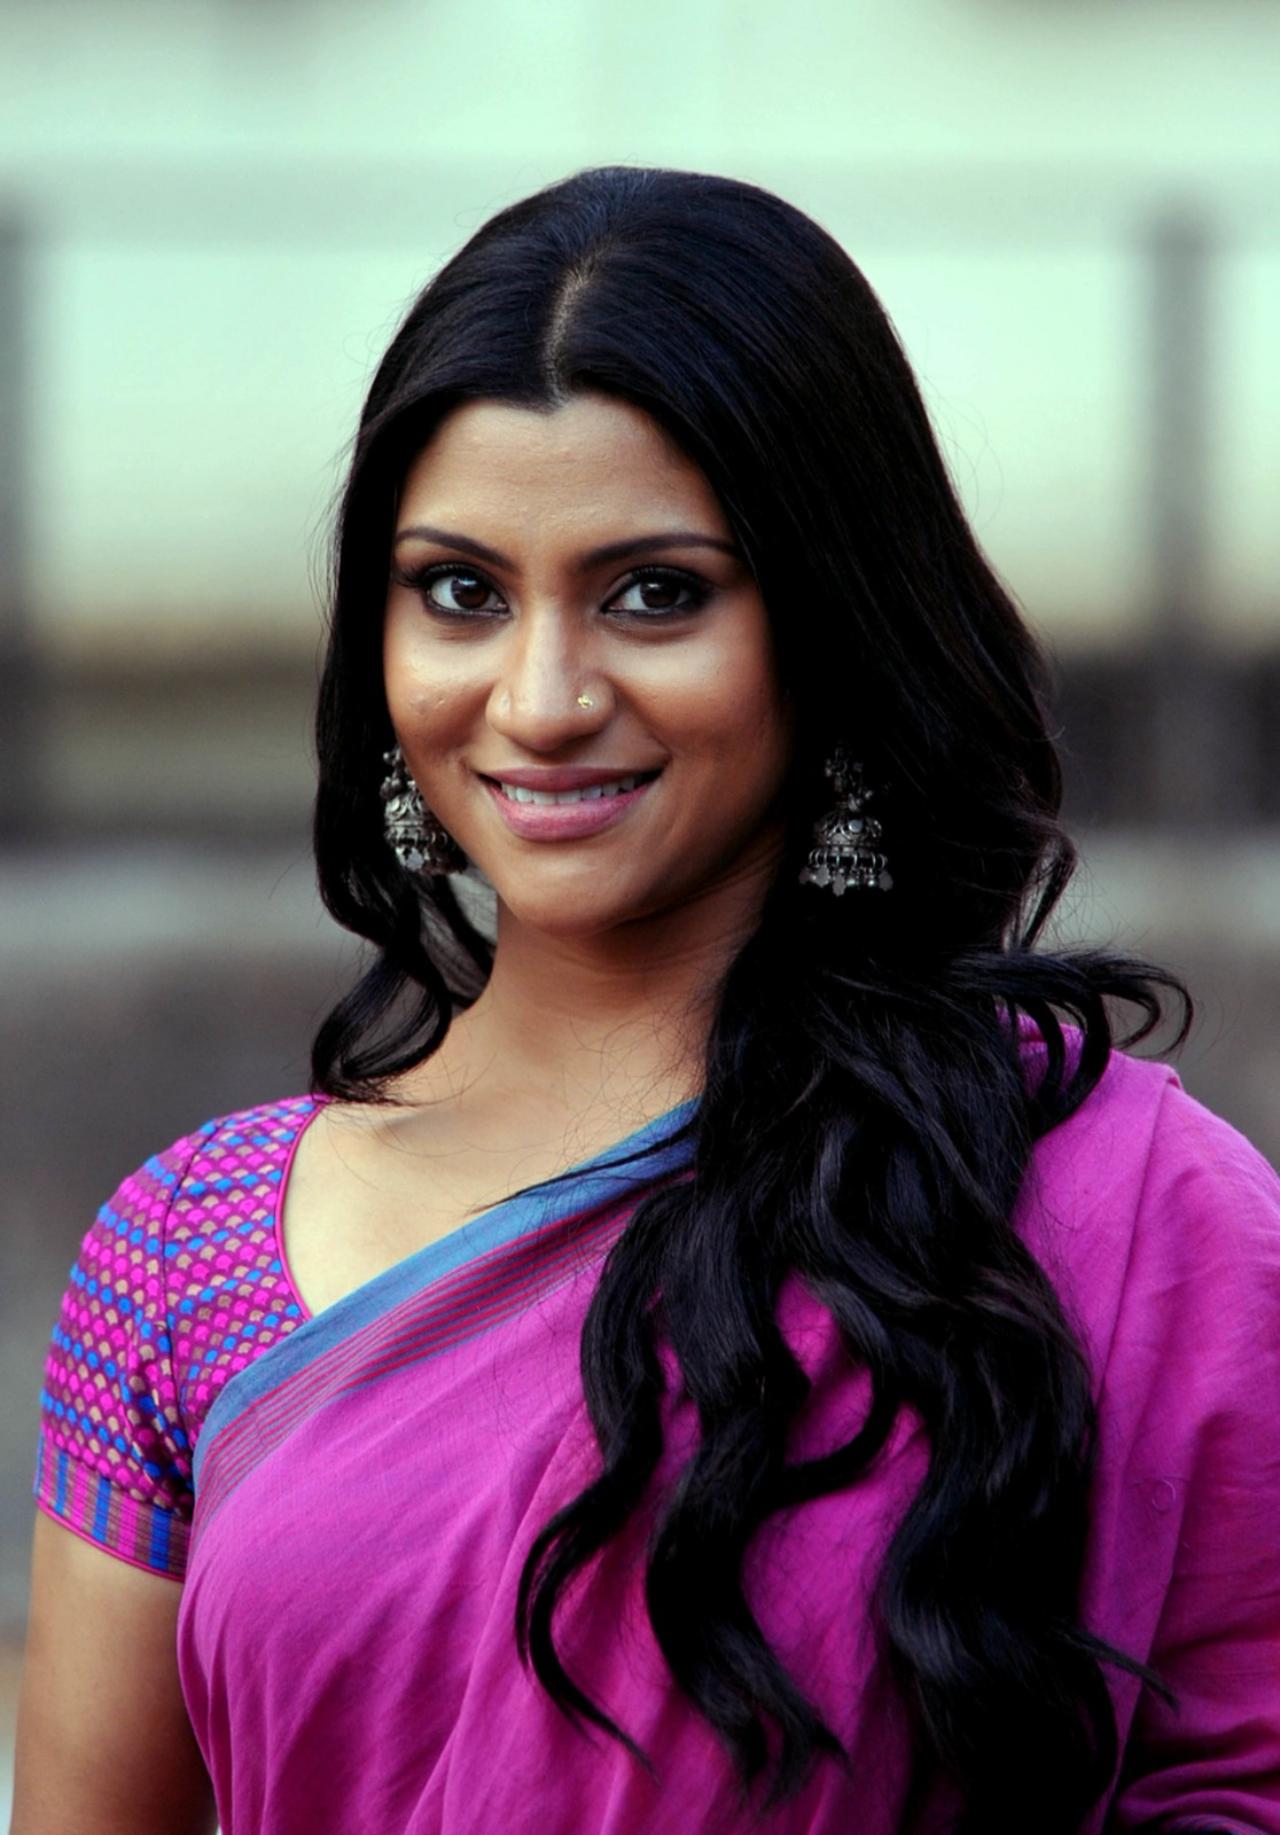 Konkona Sen Sharma
The talented actress Konkana Sen Sharma has given some memorable performances as an actress. She tried her hands in writing with the short film Naamkoron. Taking further her writing skills she has written and directed thriller A Death in the Gunj that won her several accolades